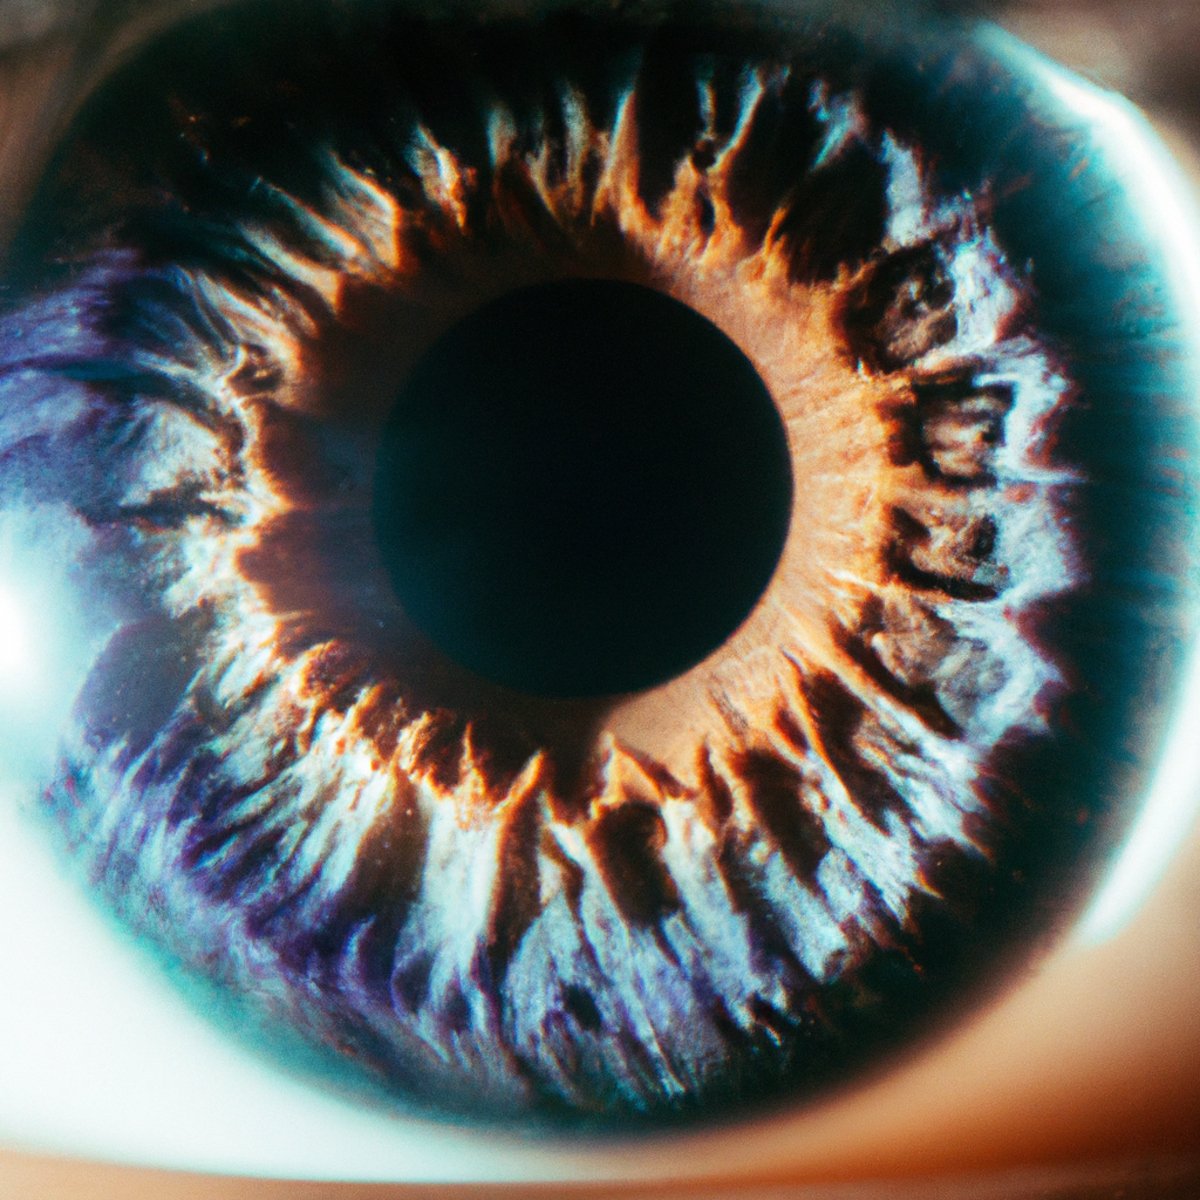 Close-up of human eye with vibrant iris colors and scientific equipment, representing Hermansky-Pudlak Syndrome.